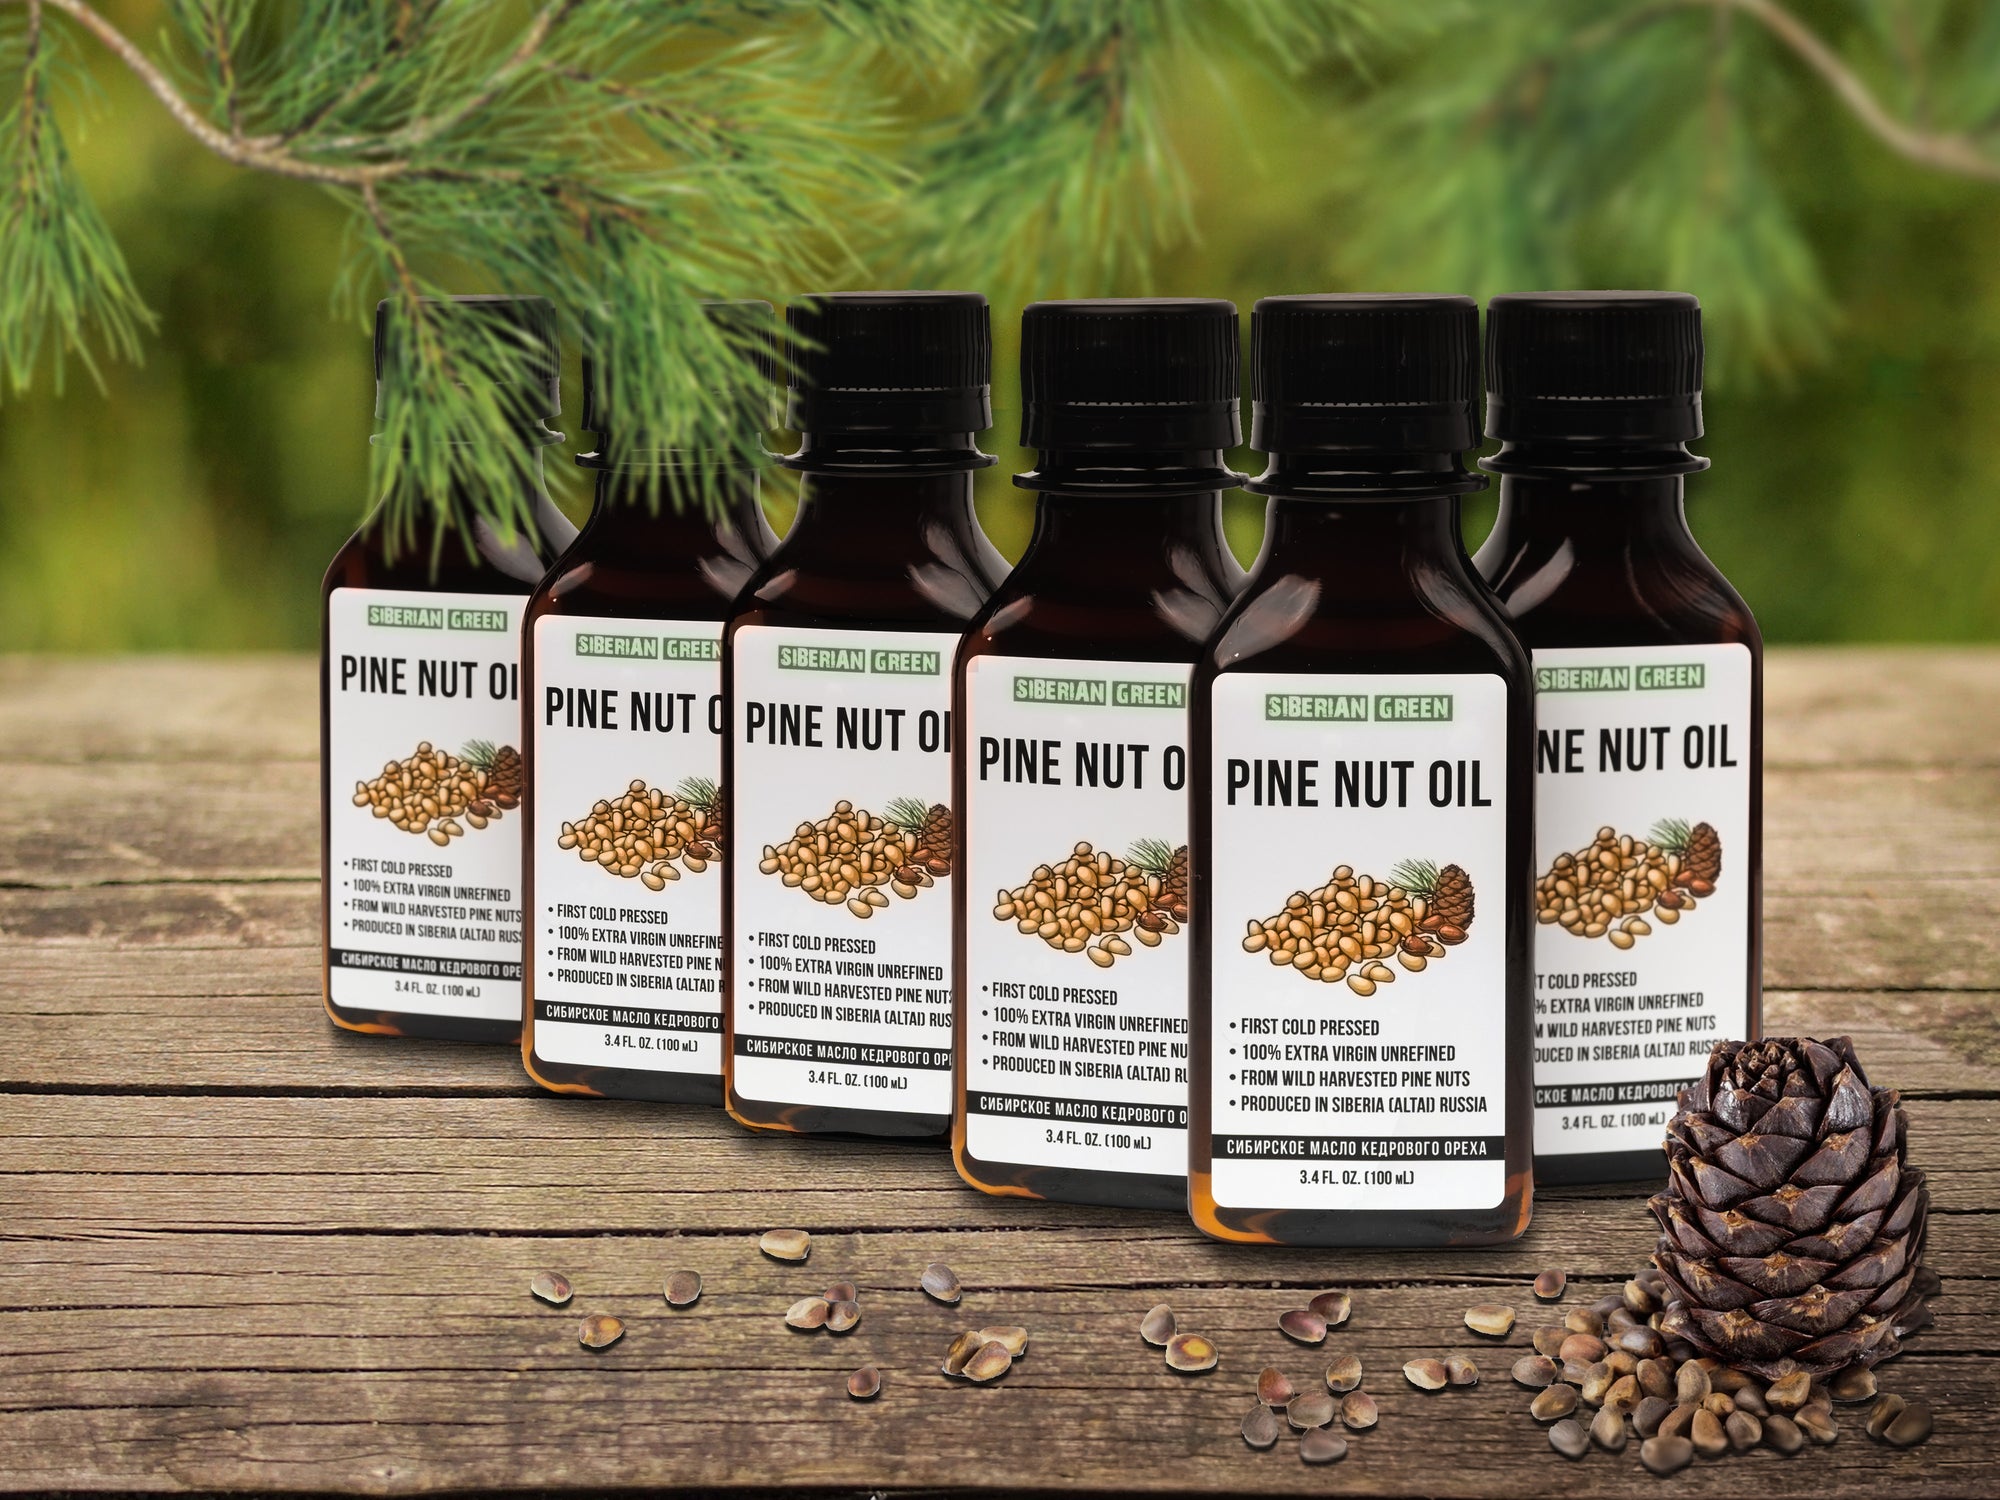 Pine nut oil contains 15% omega-9 oleic acid - can this fatty acid help you and how?